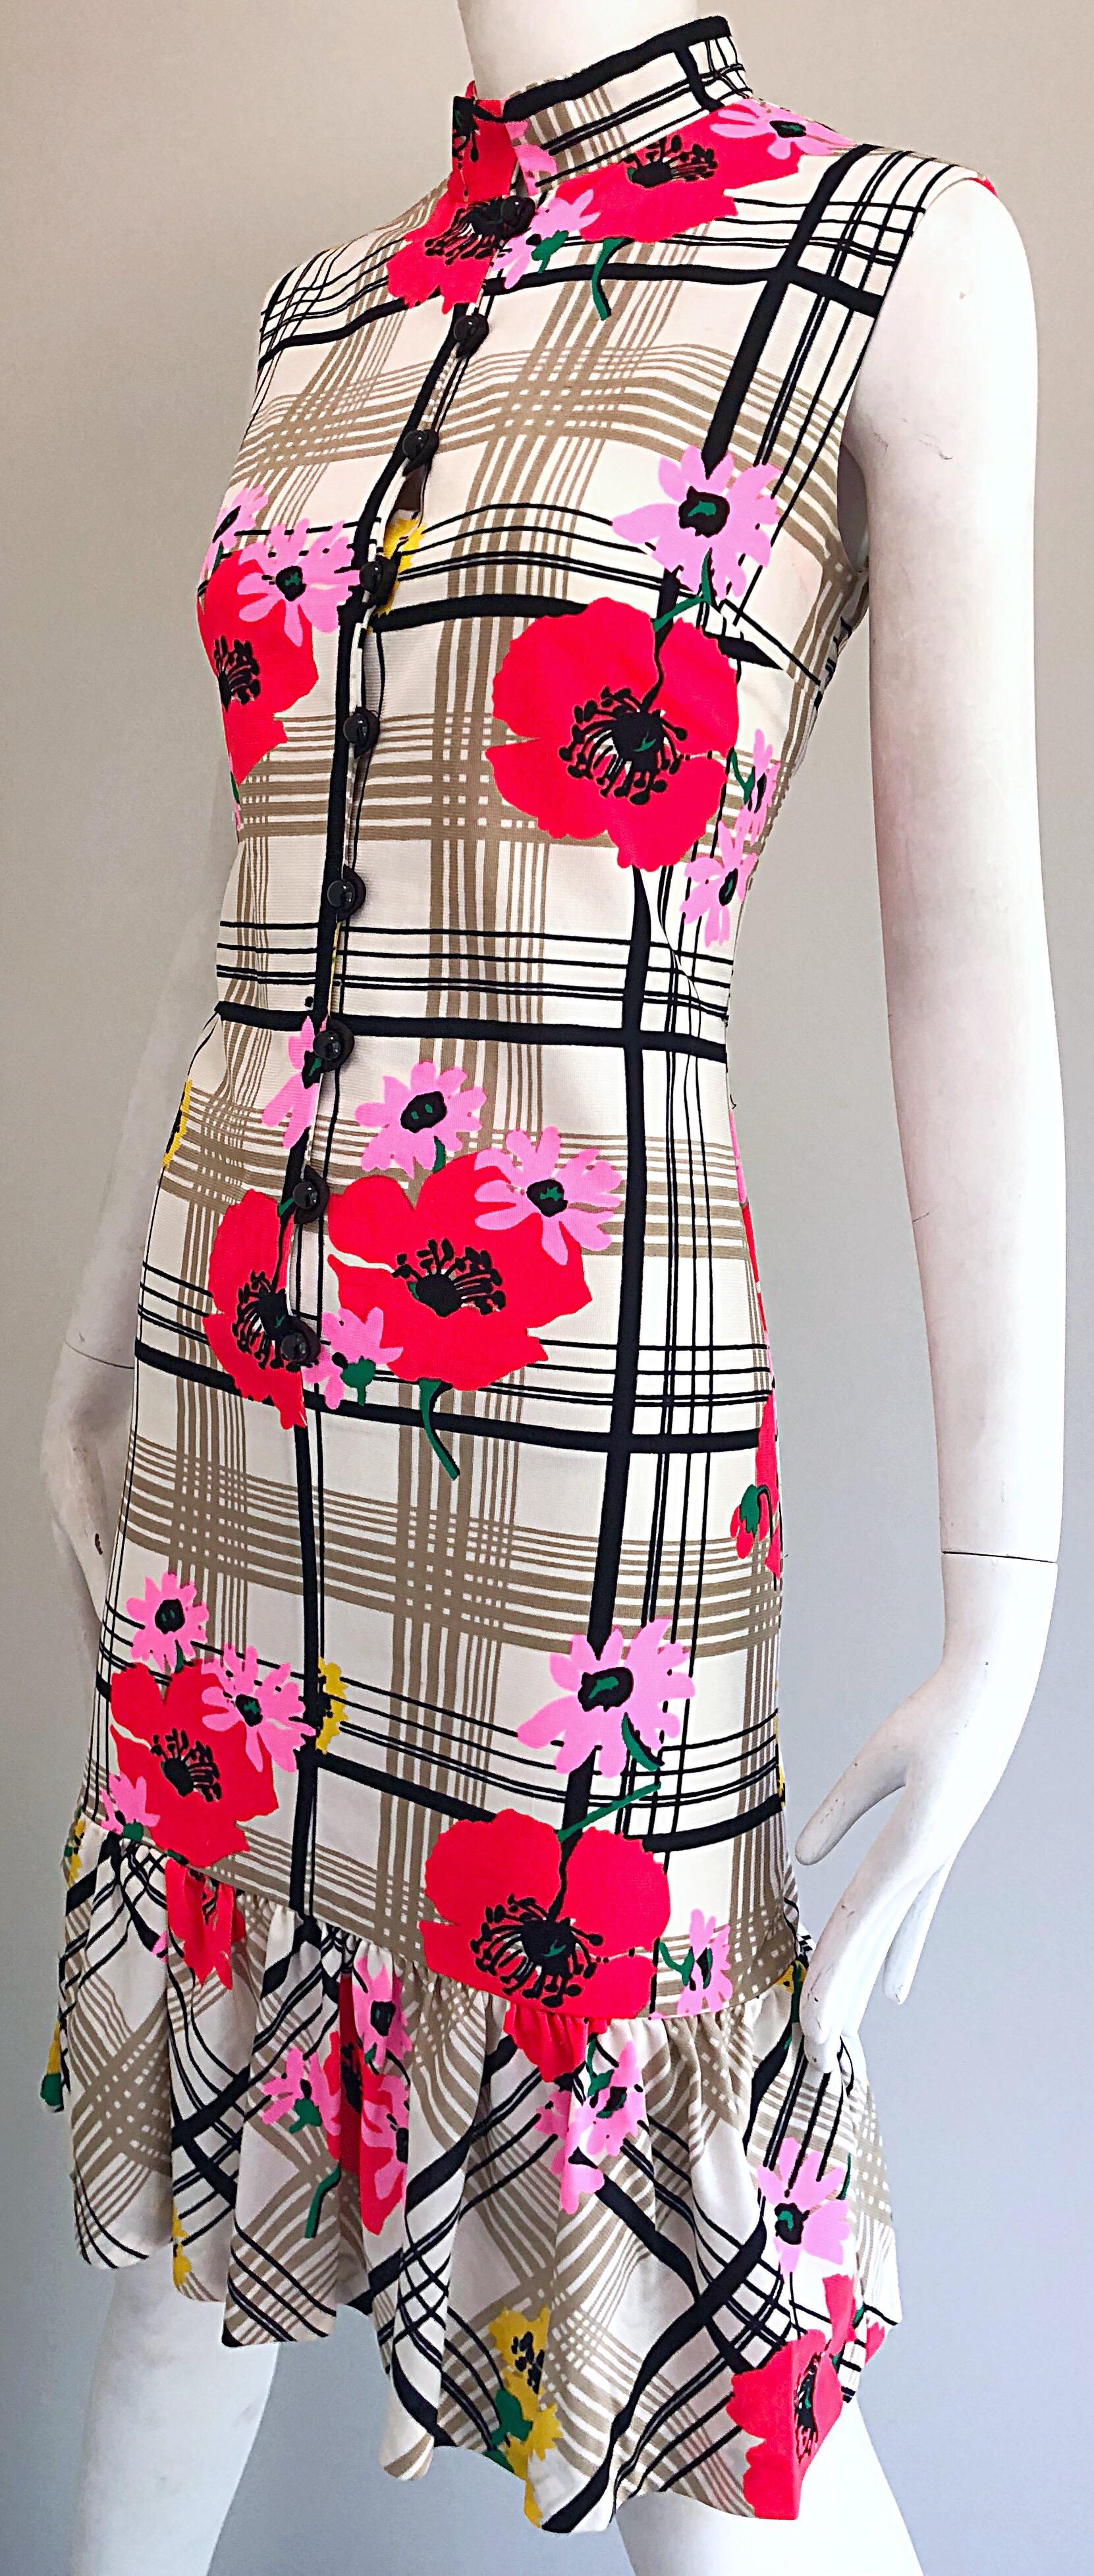 Women's Chic 1960s Stripes and Flowers Black and White Colorful Vintage 60s Shift Dress